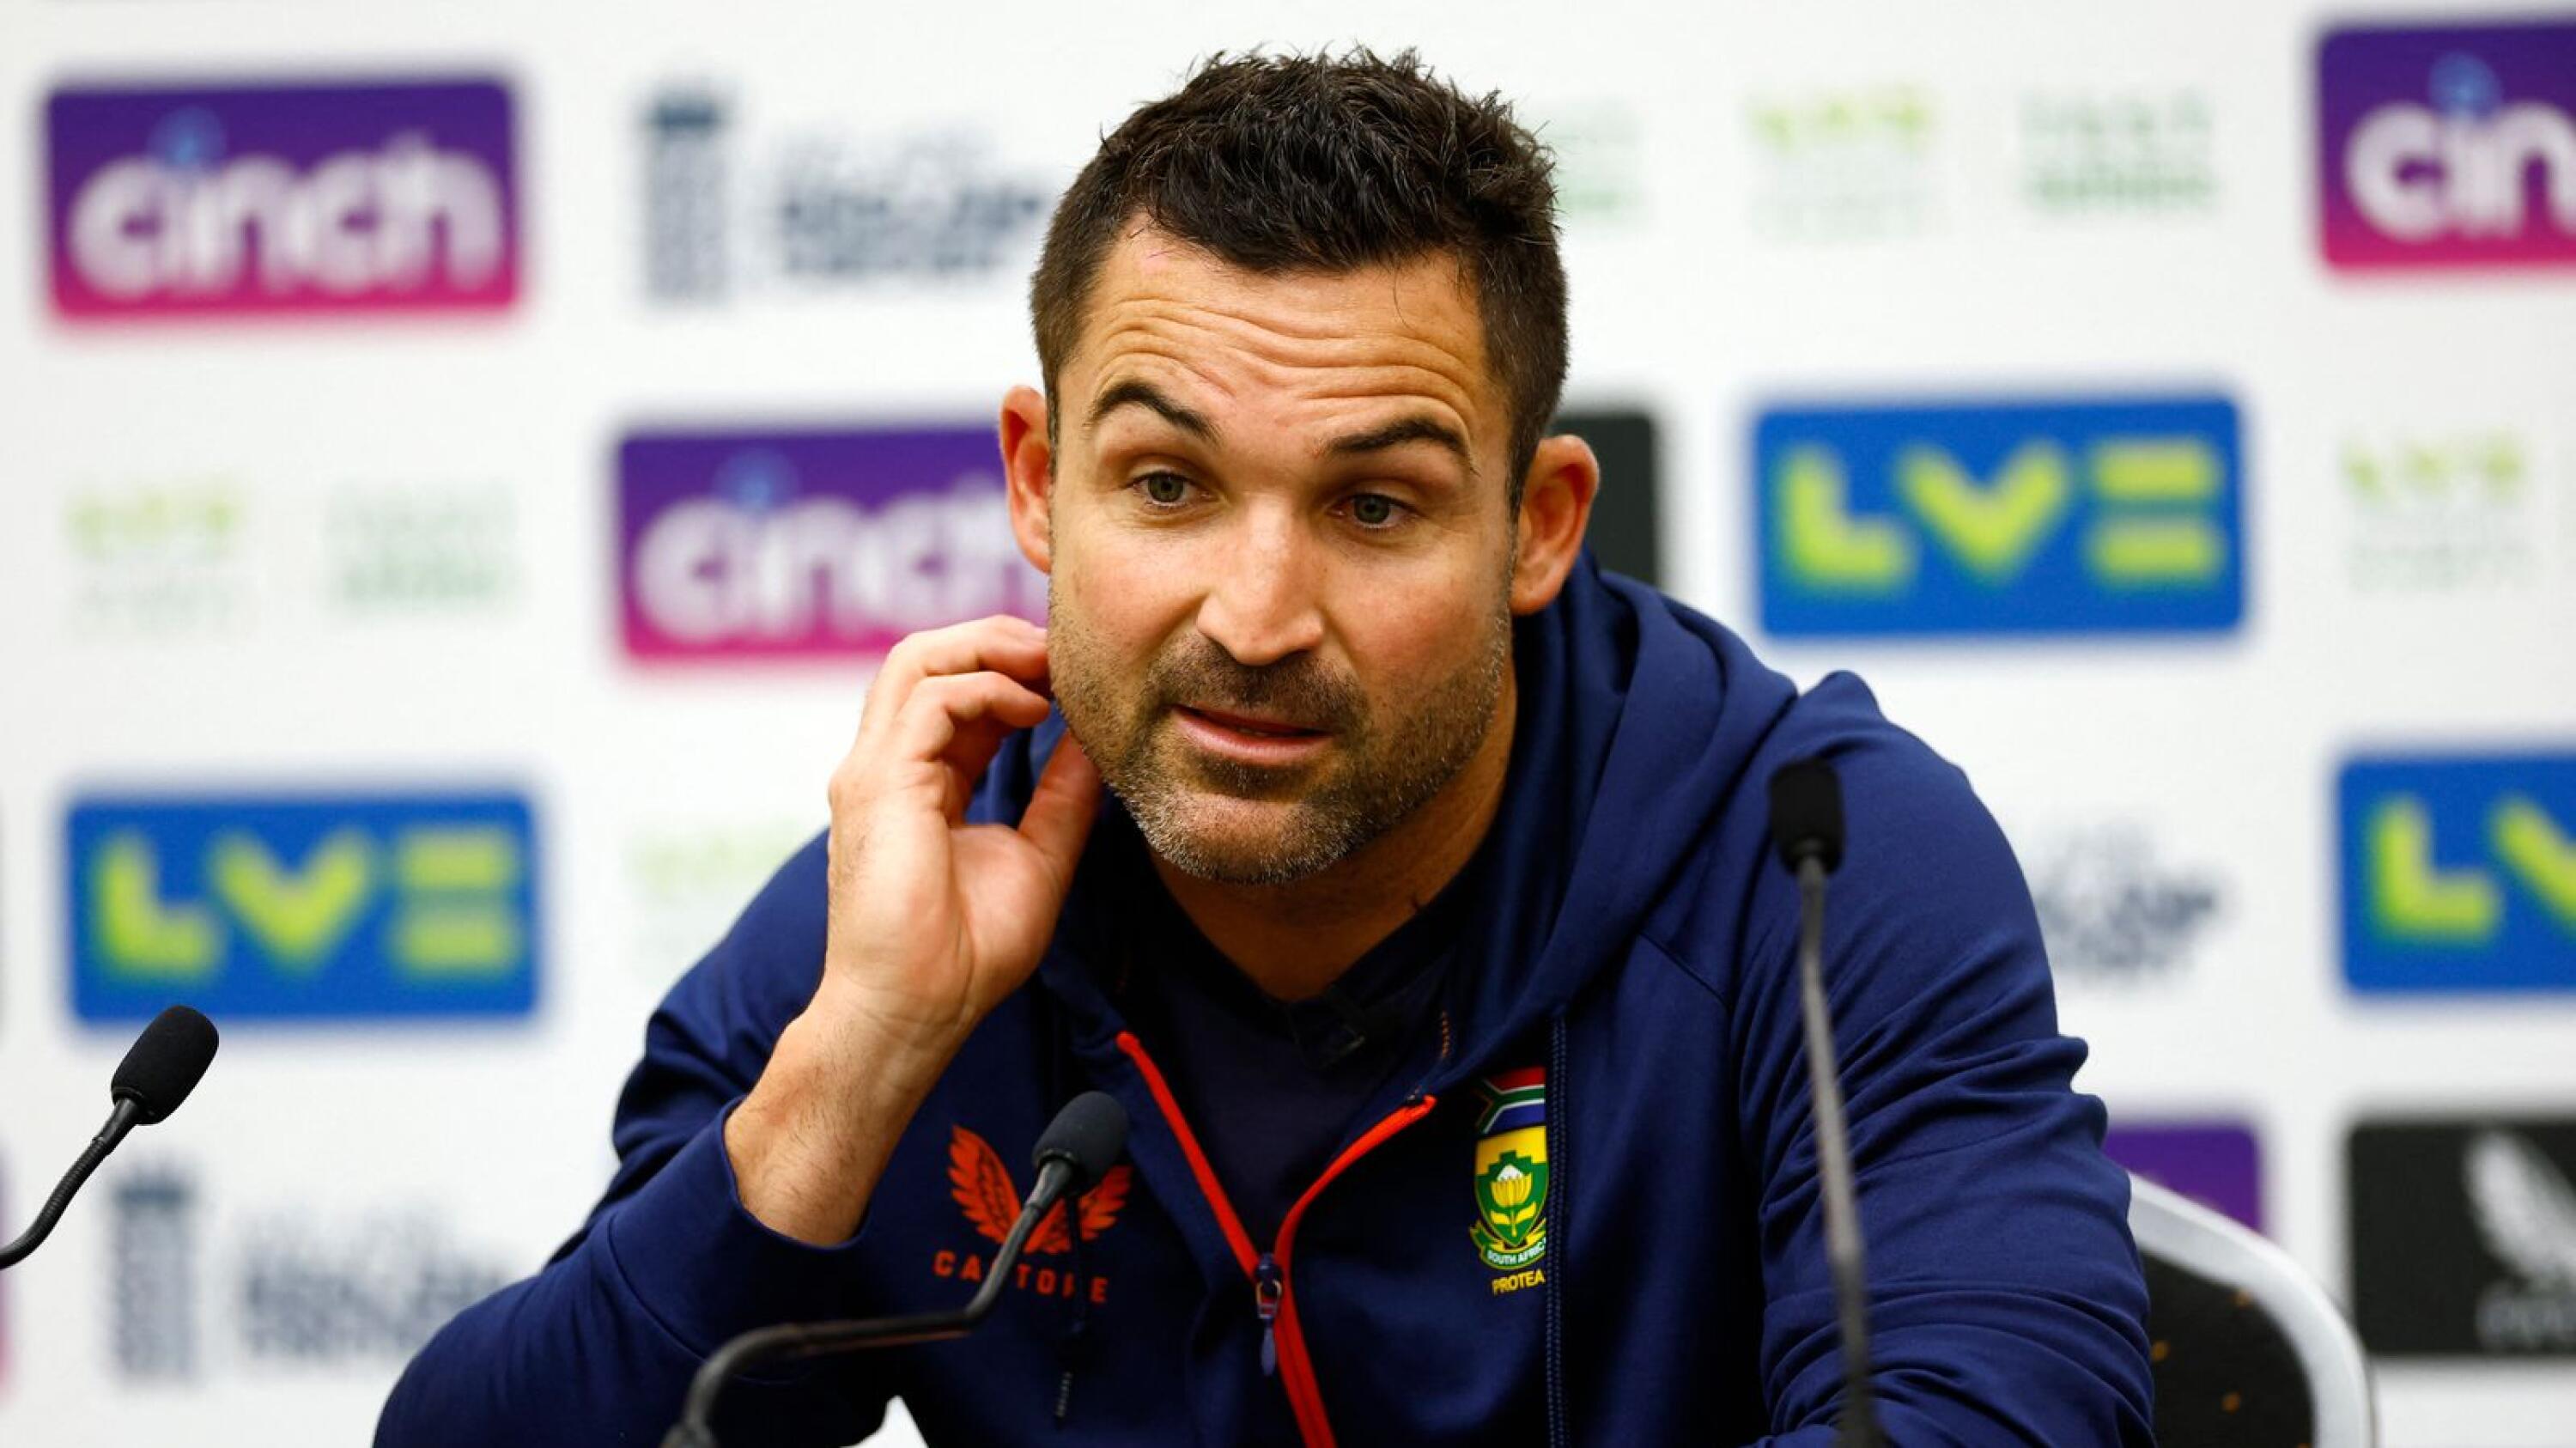 South Africa's Dean Elgar speaks to the media during a press conference ahead of the third and deciding Test match against England at the Oval